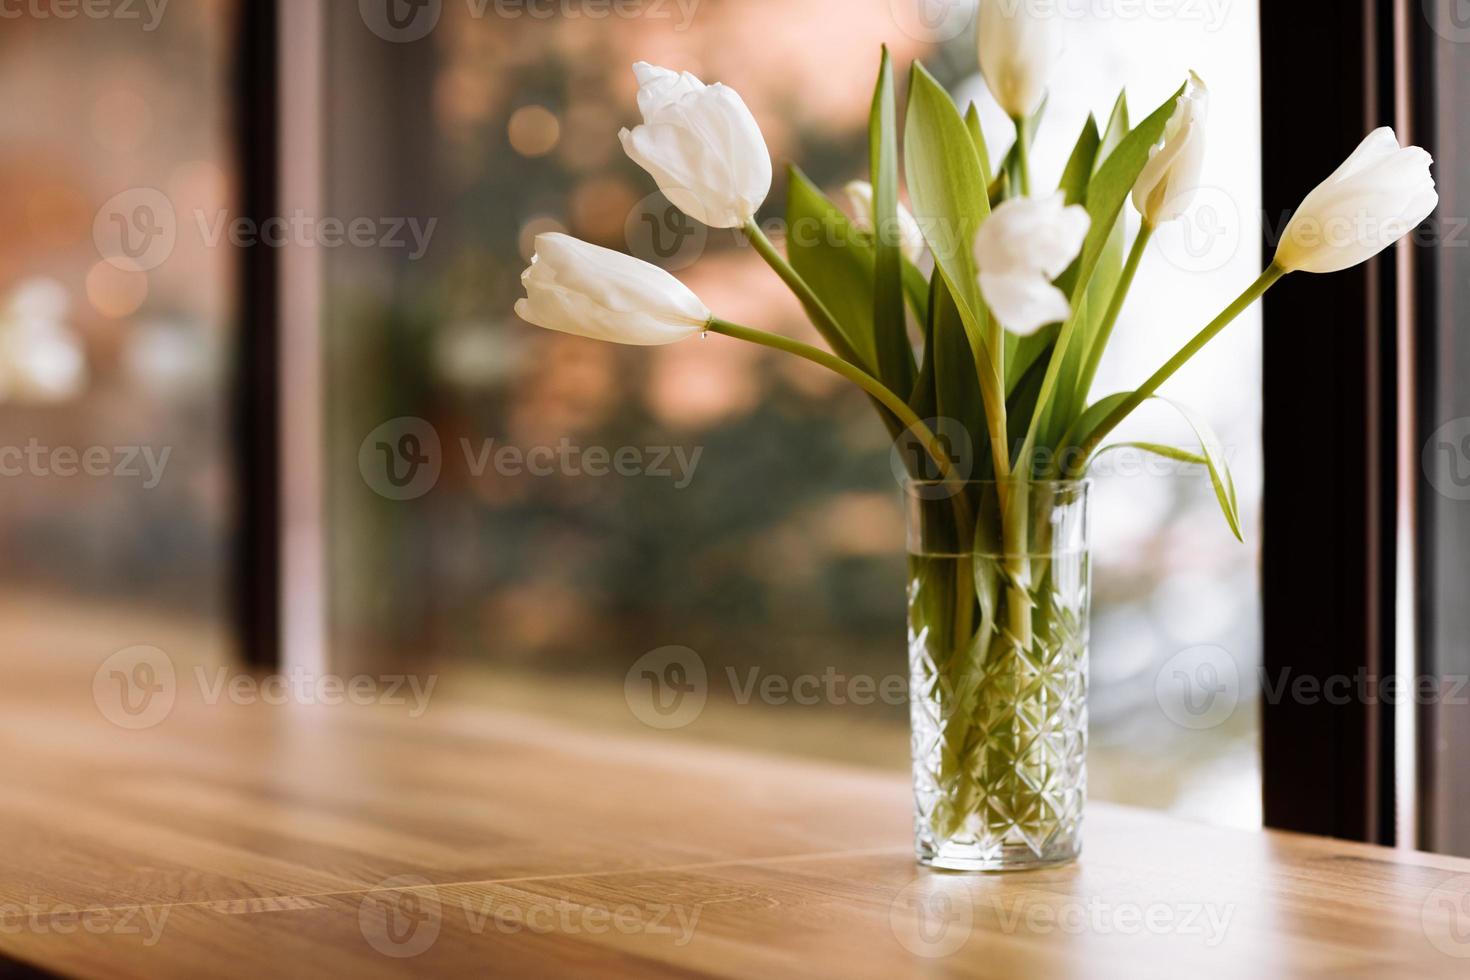 Vase with white flowers on big windows background with wooden table. Home coziness concept. Bouquet of tulips in glass vase. photo